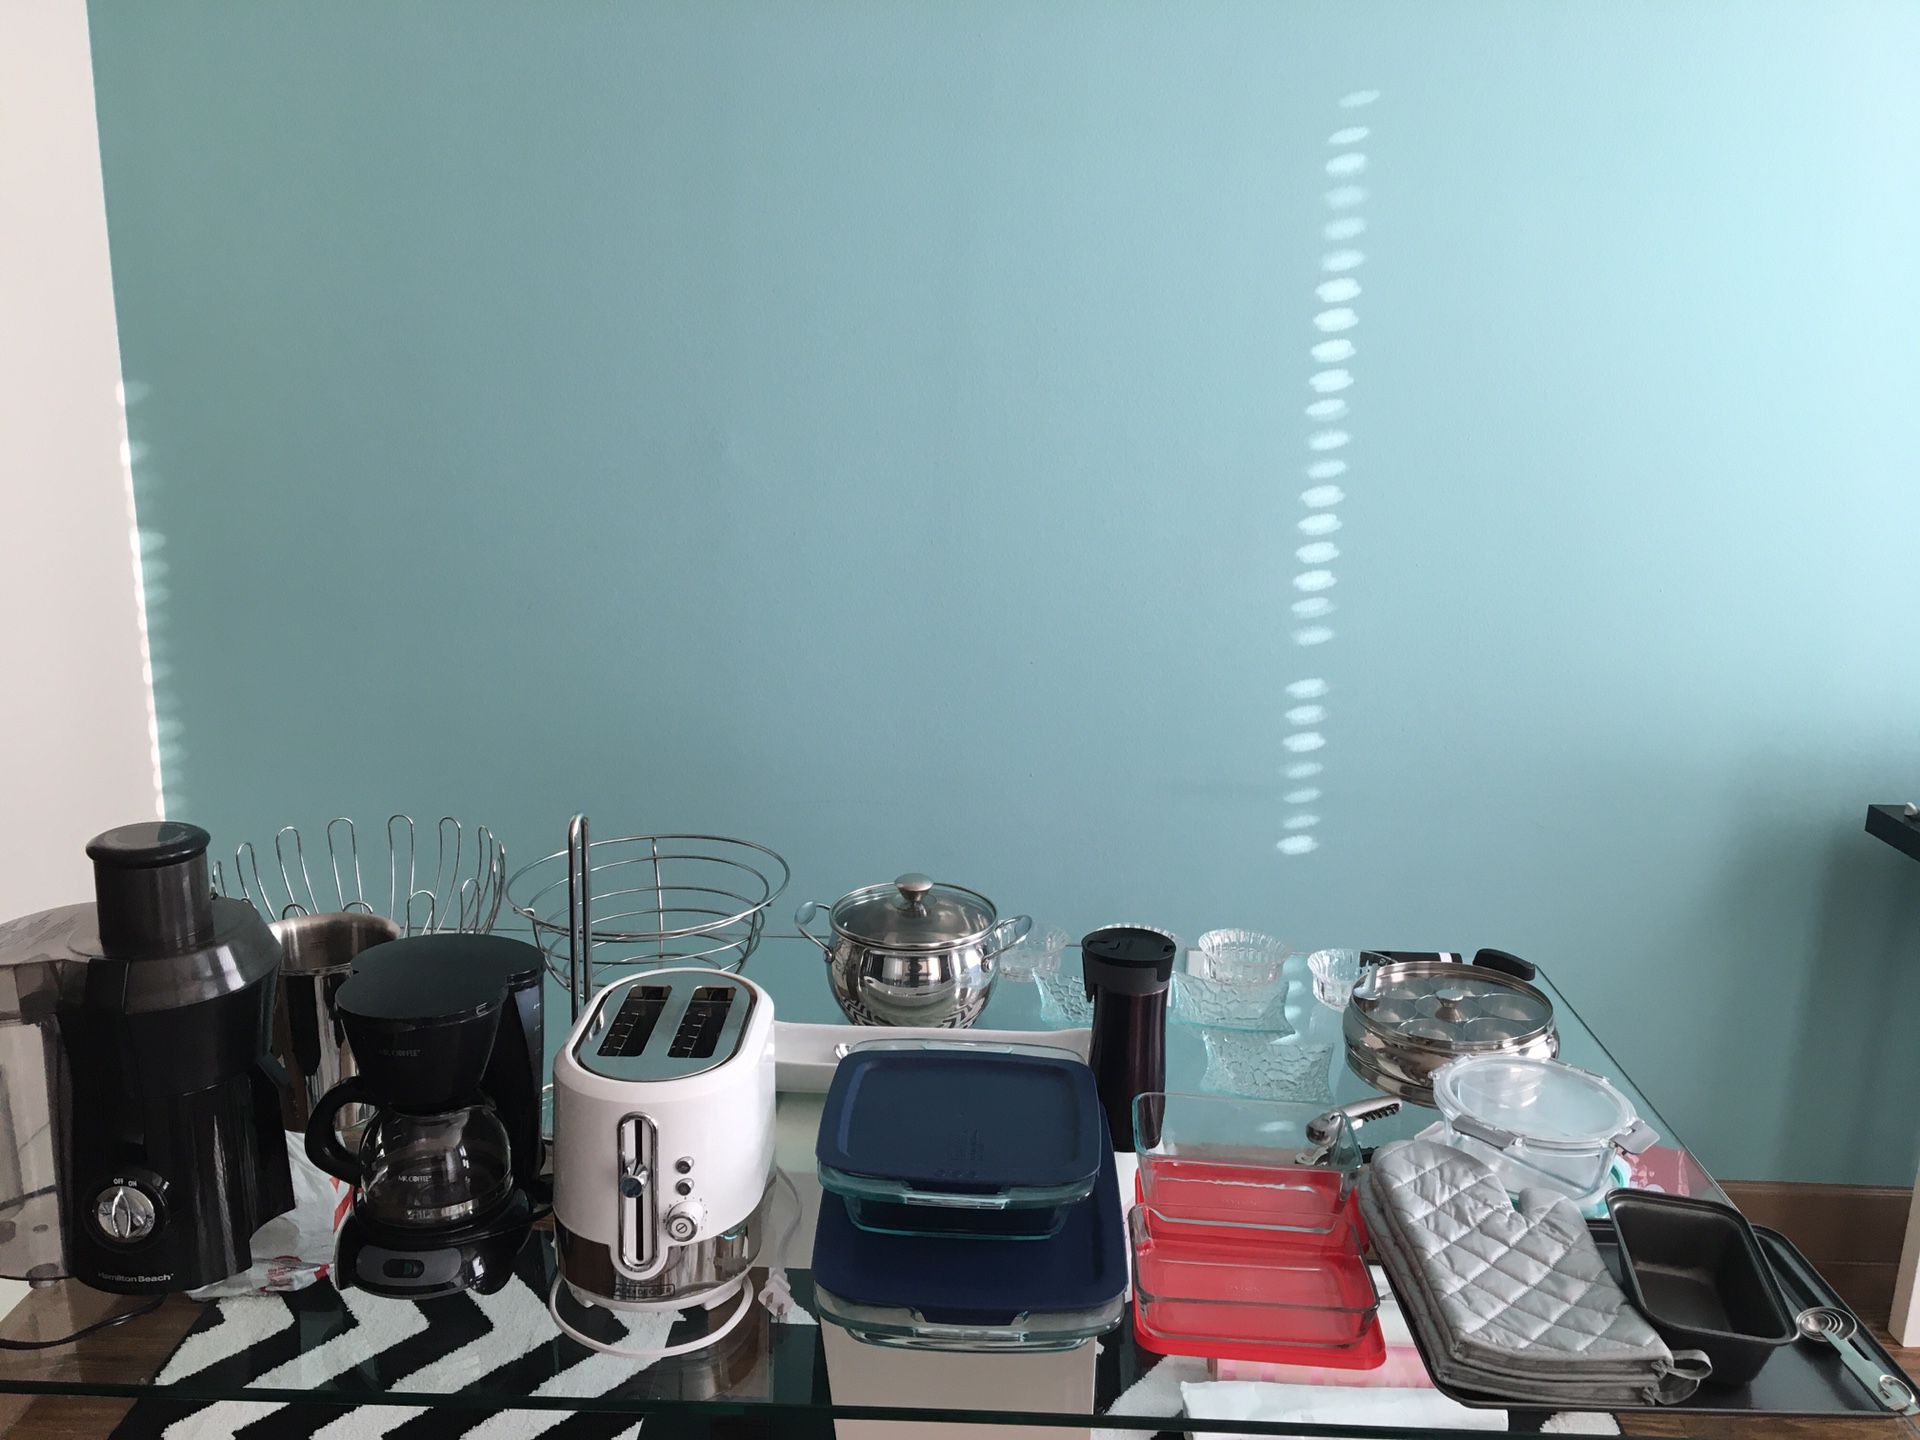 Kitchen Appliances, baking, storage containers, stainless steel wares and decorative glass wares